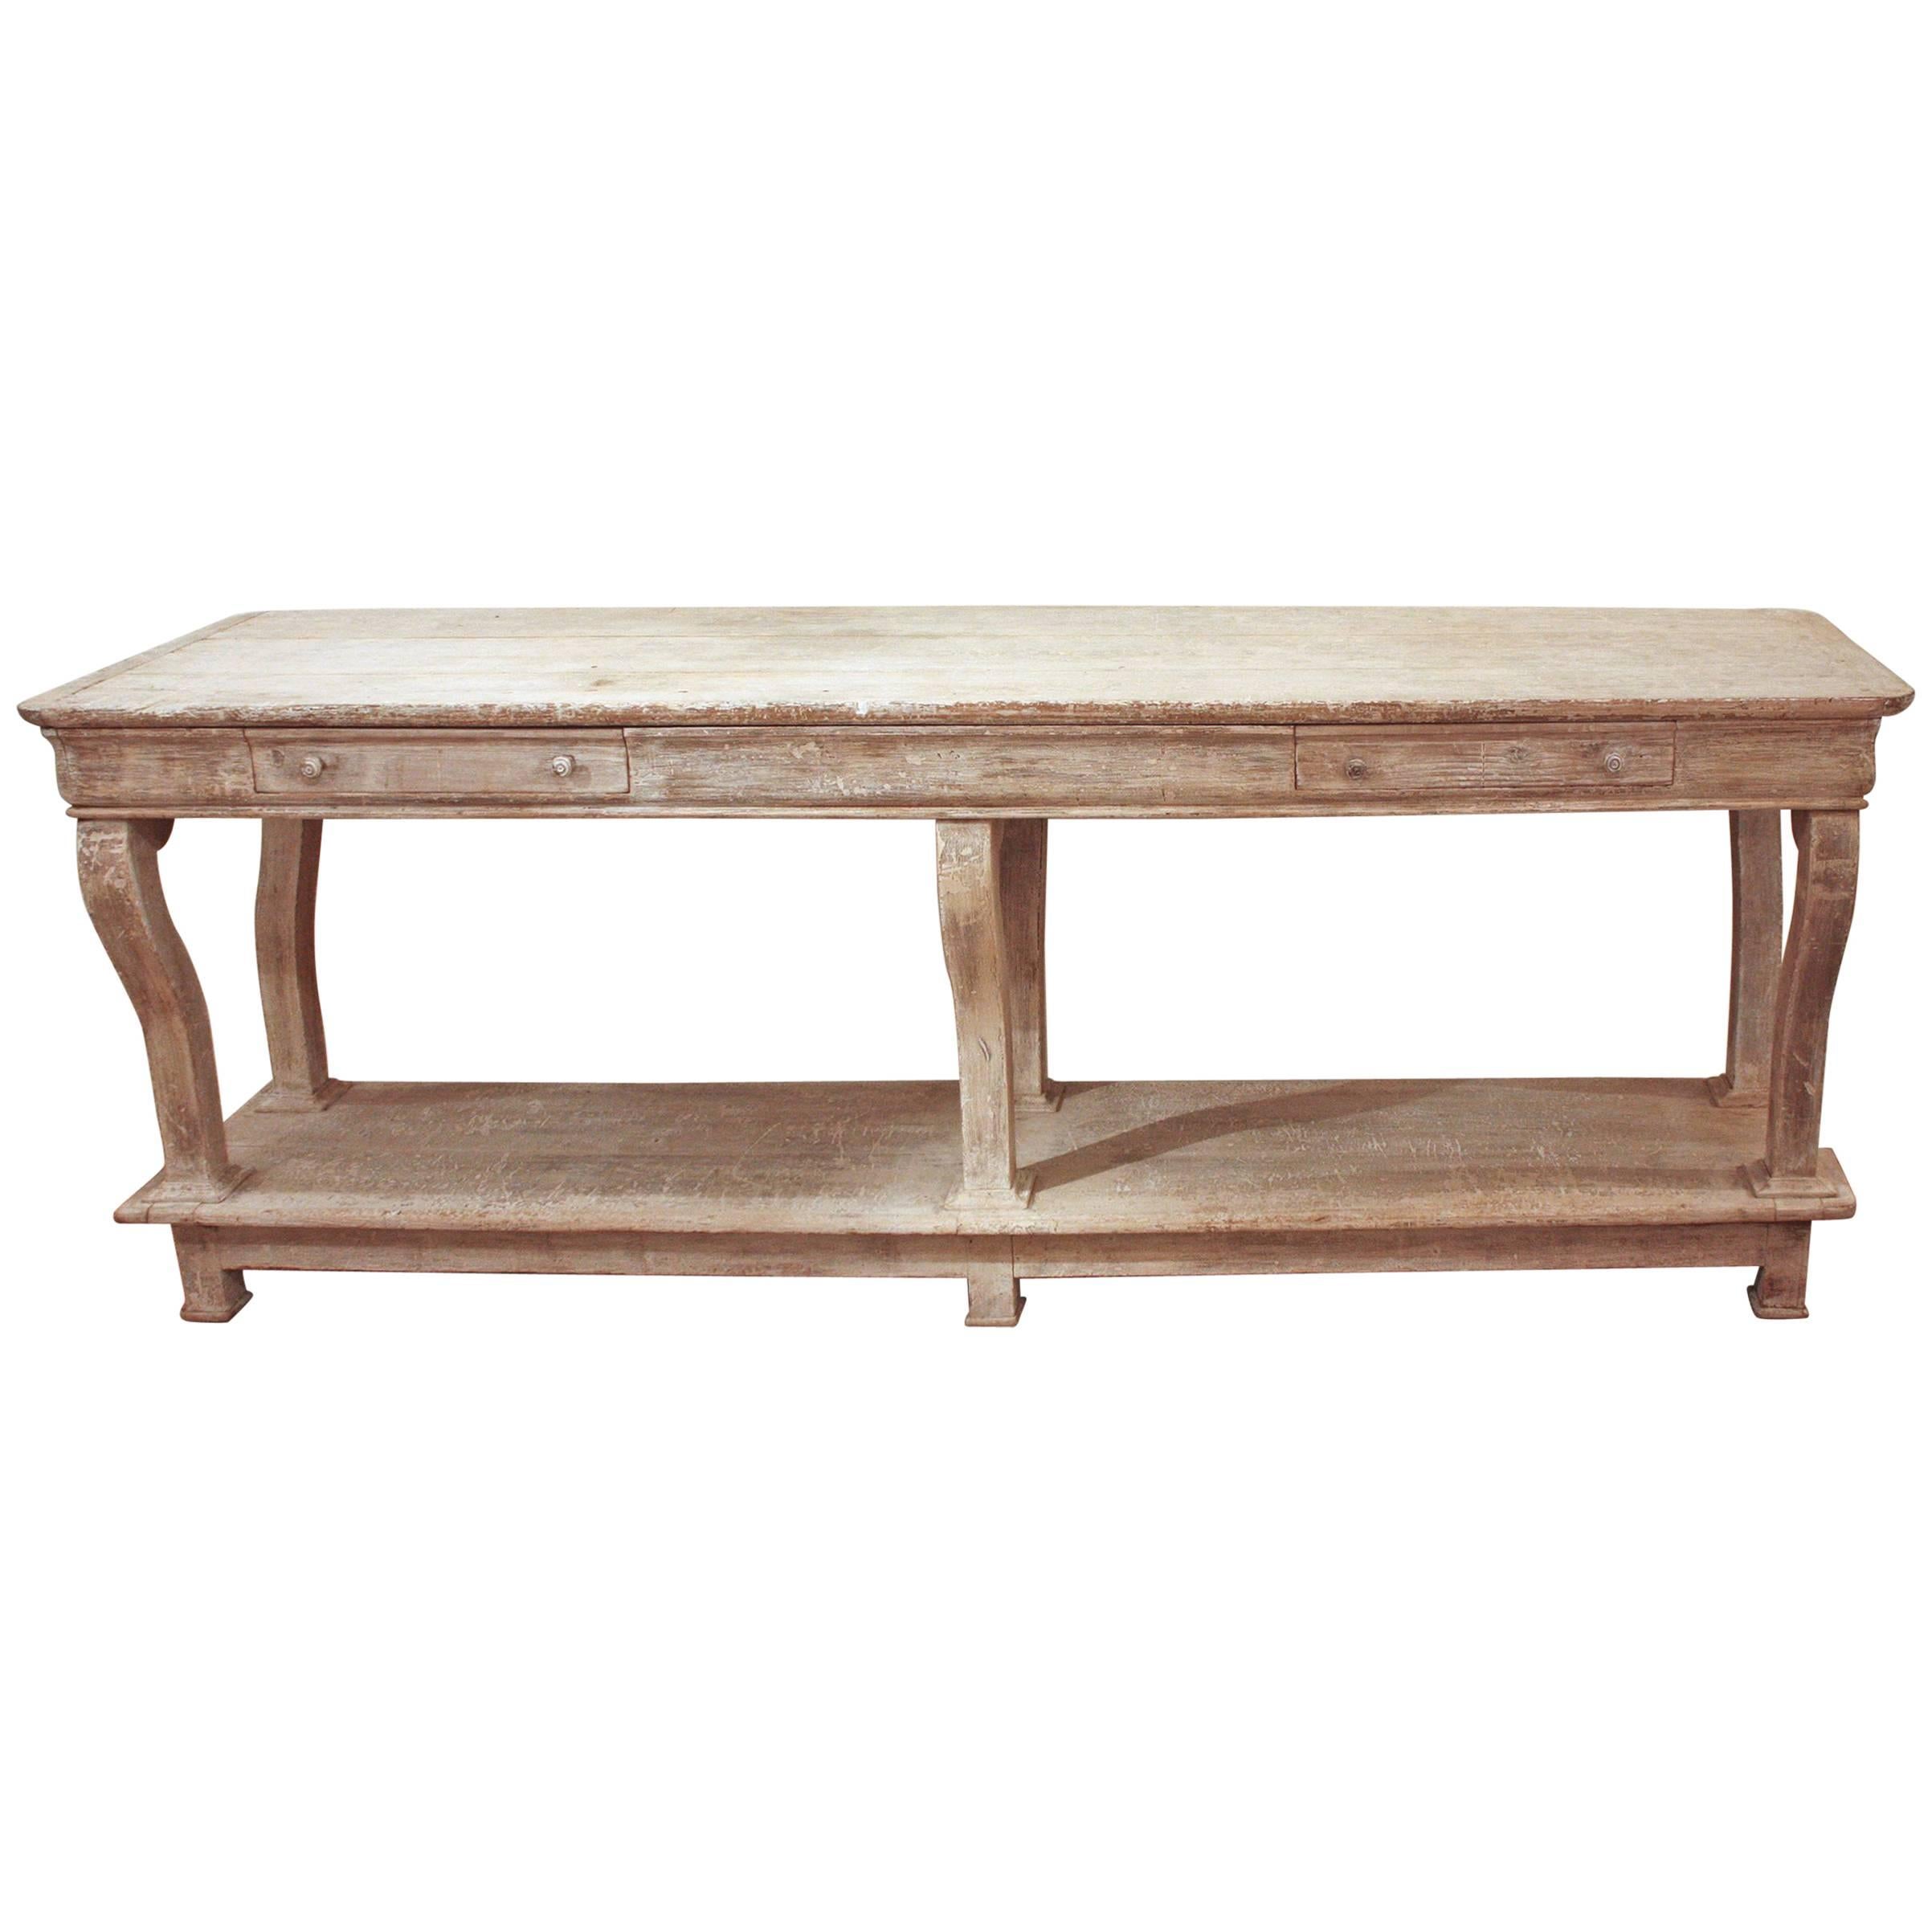 Painted Country French Console Table / Buffet